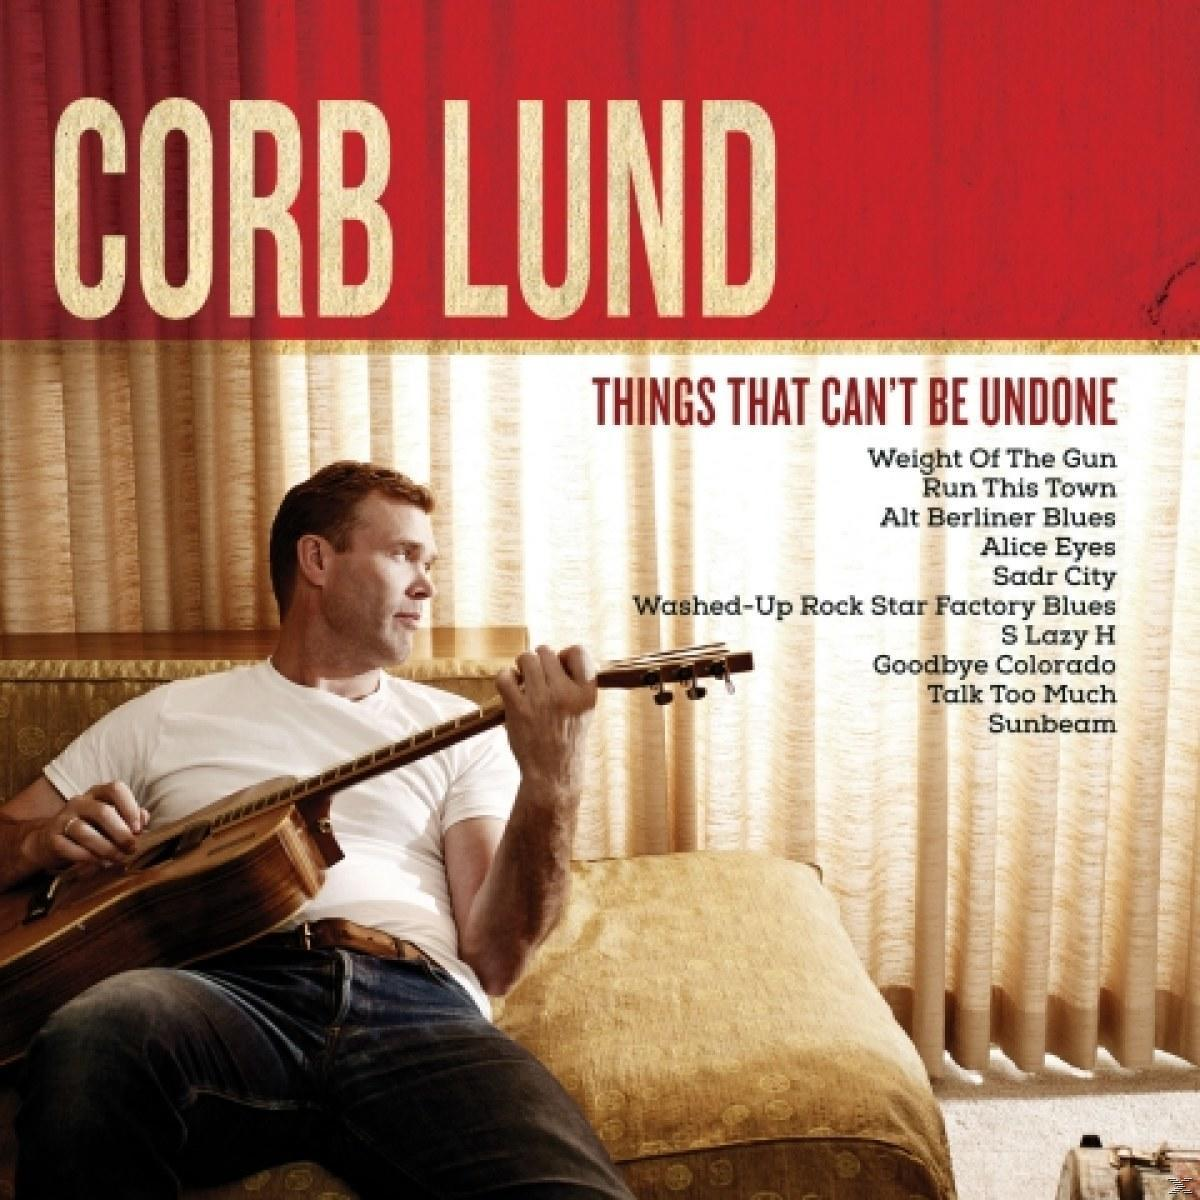 - Lund (Vinyl) That Things - Be Undone Corb Can\'t